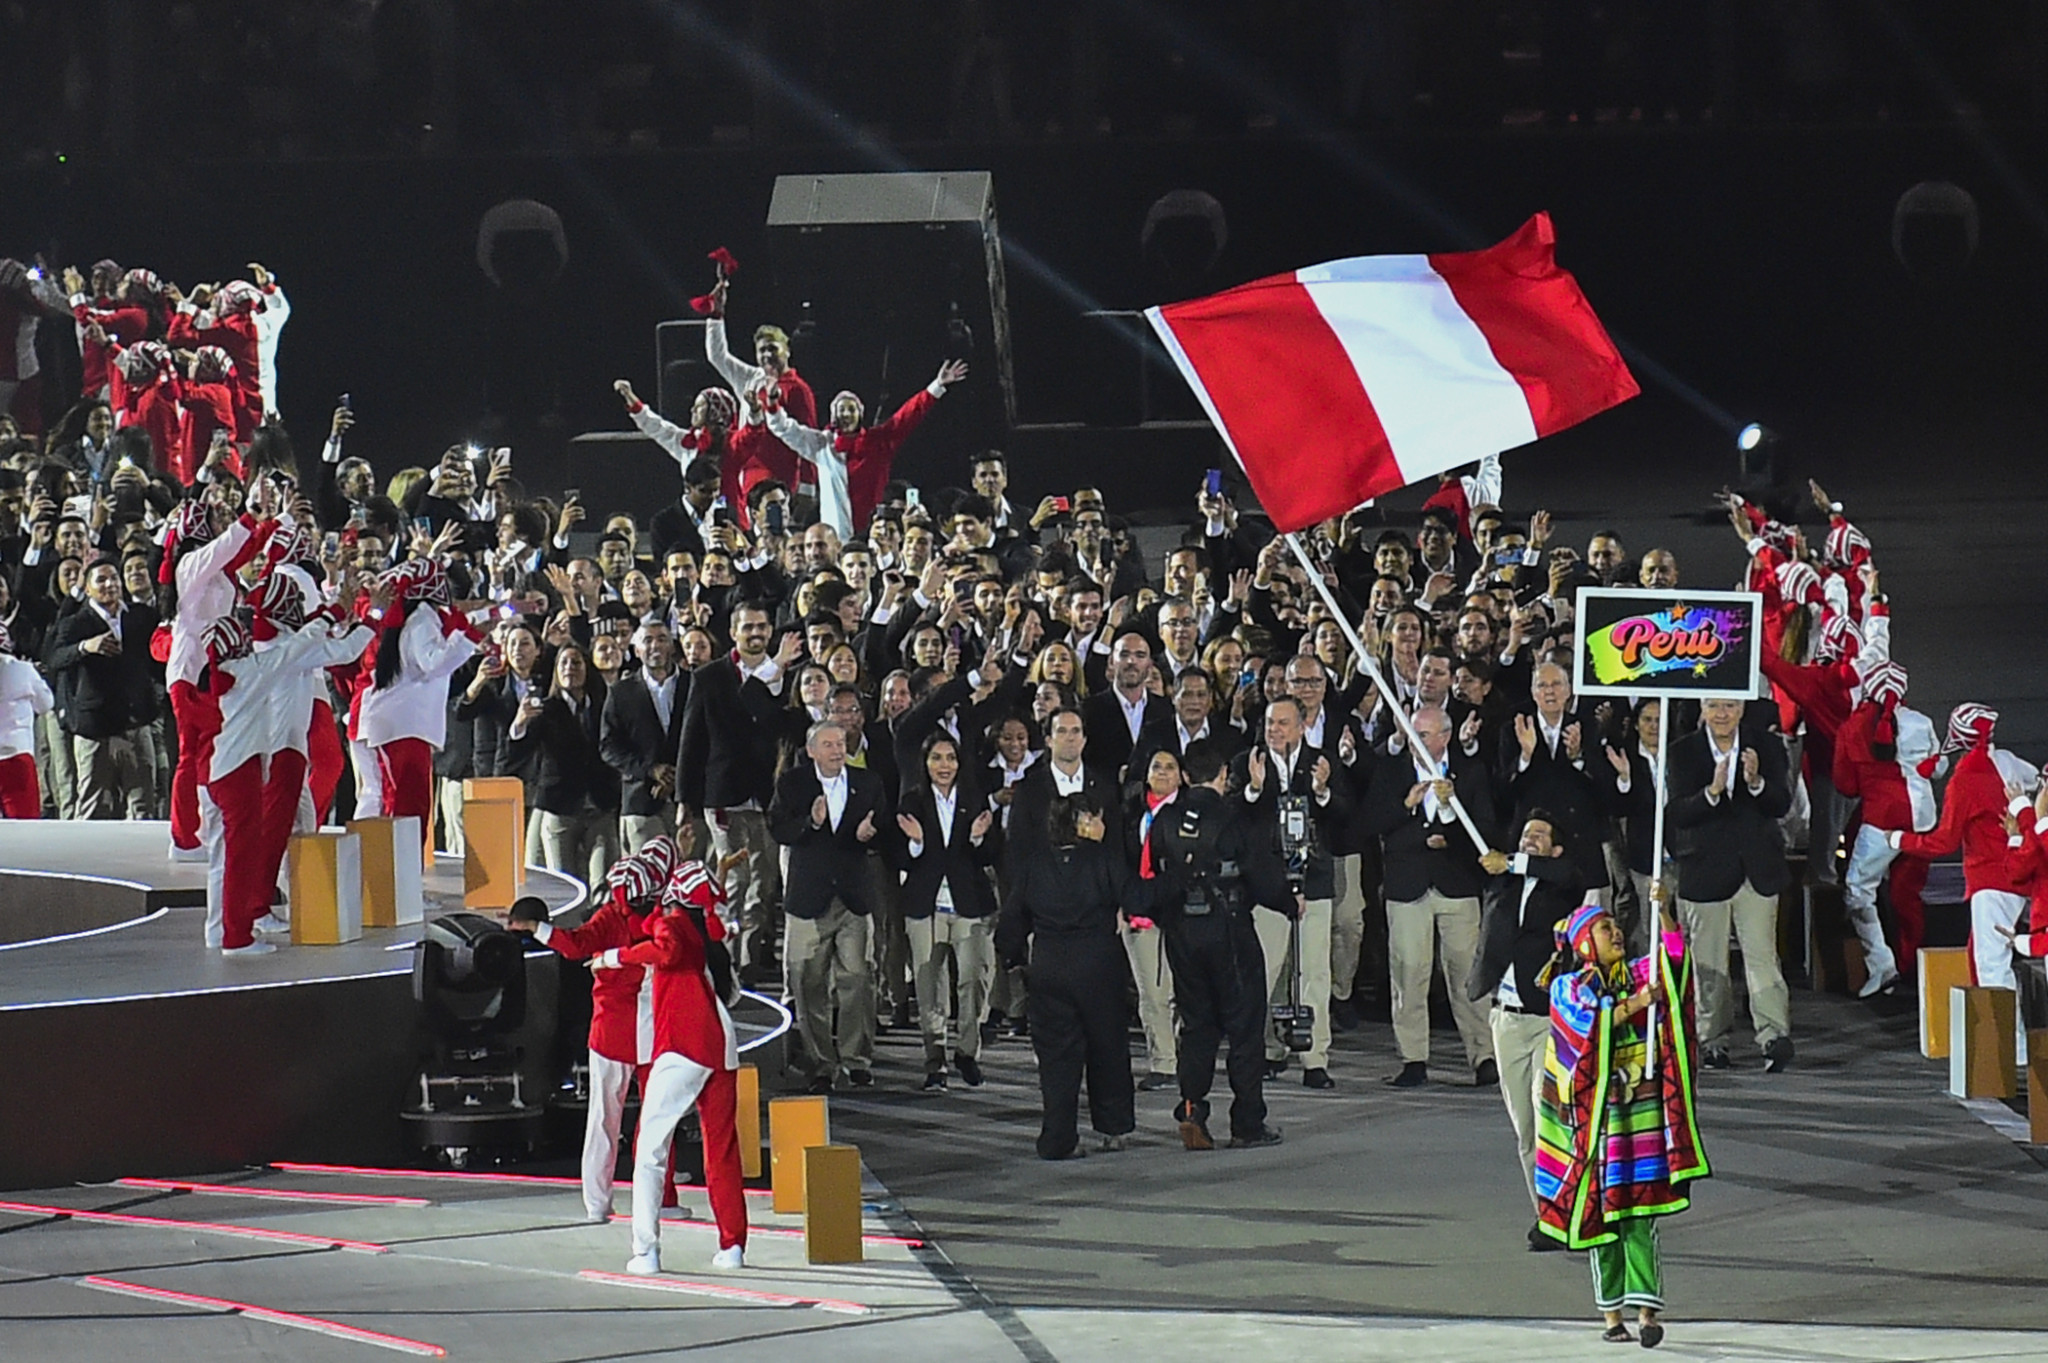 There have been 1,888 applications to volunteer from Peruvians after Lima hosted the 2019 Pan American Games ©Getty Images